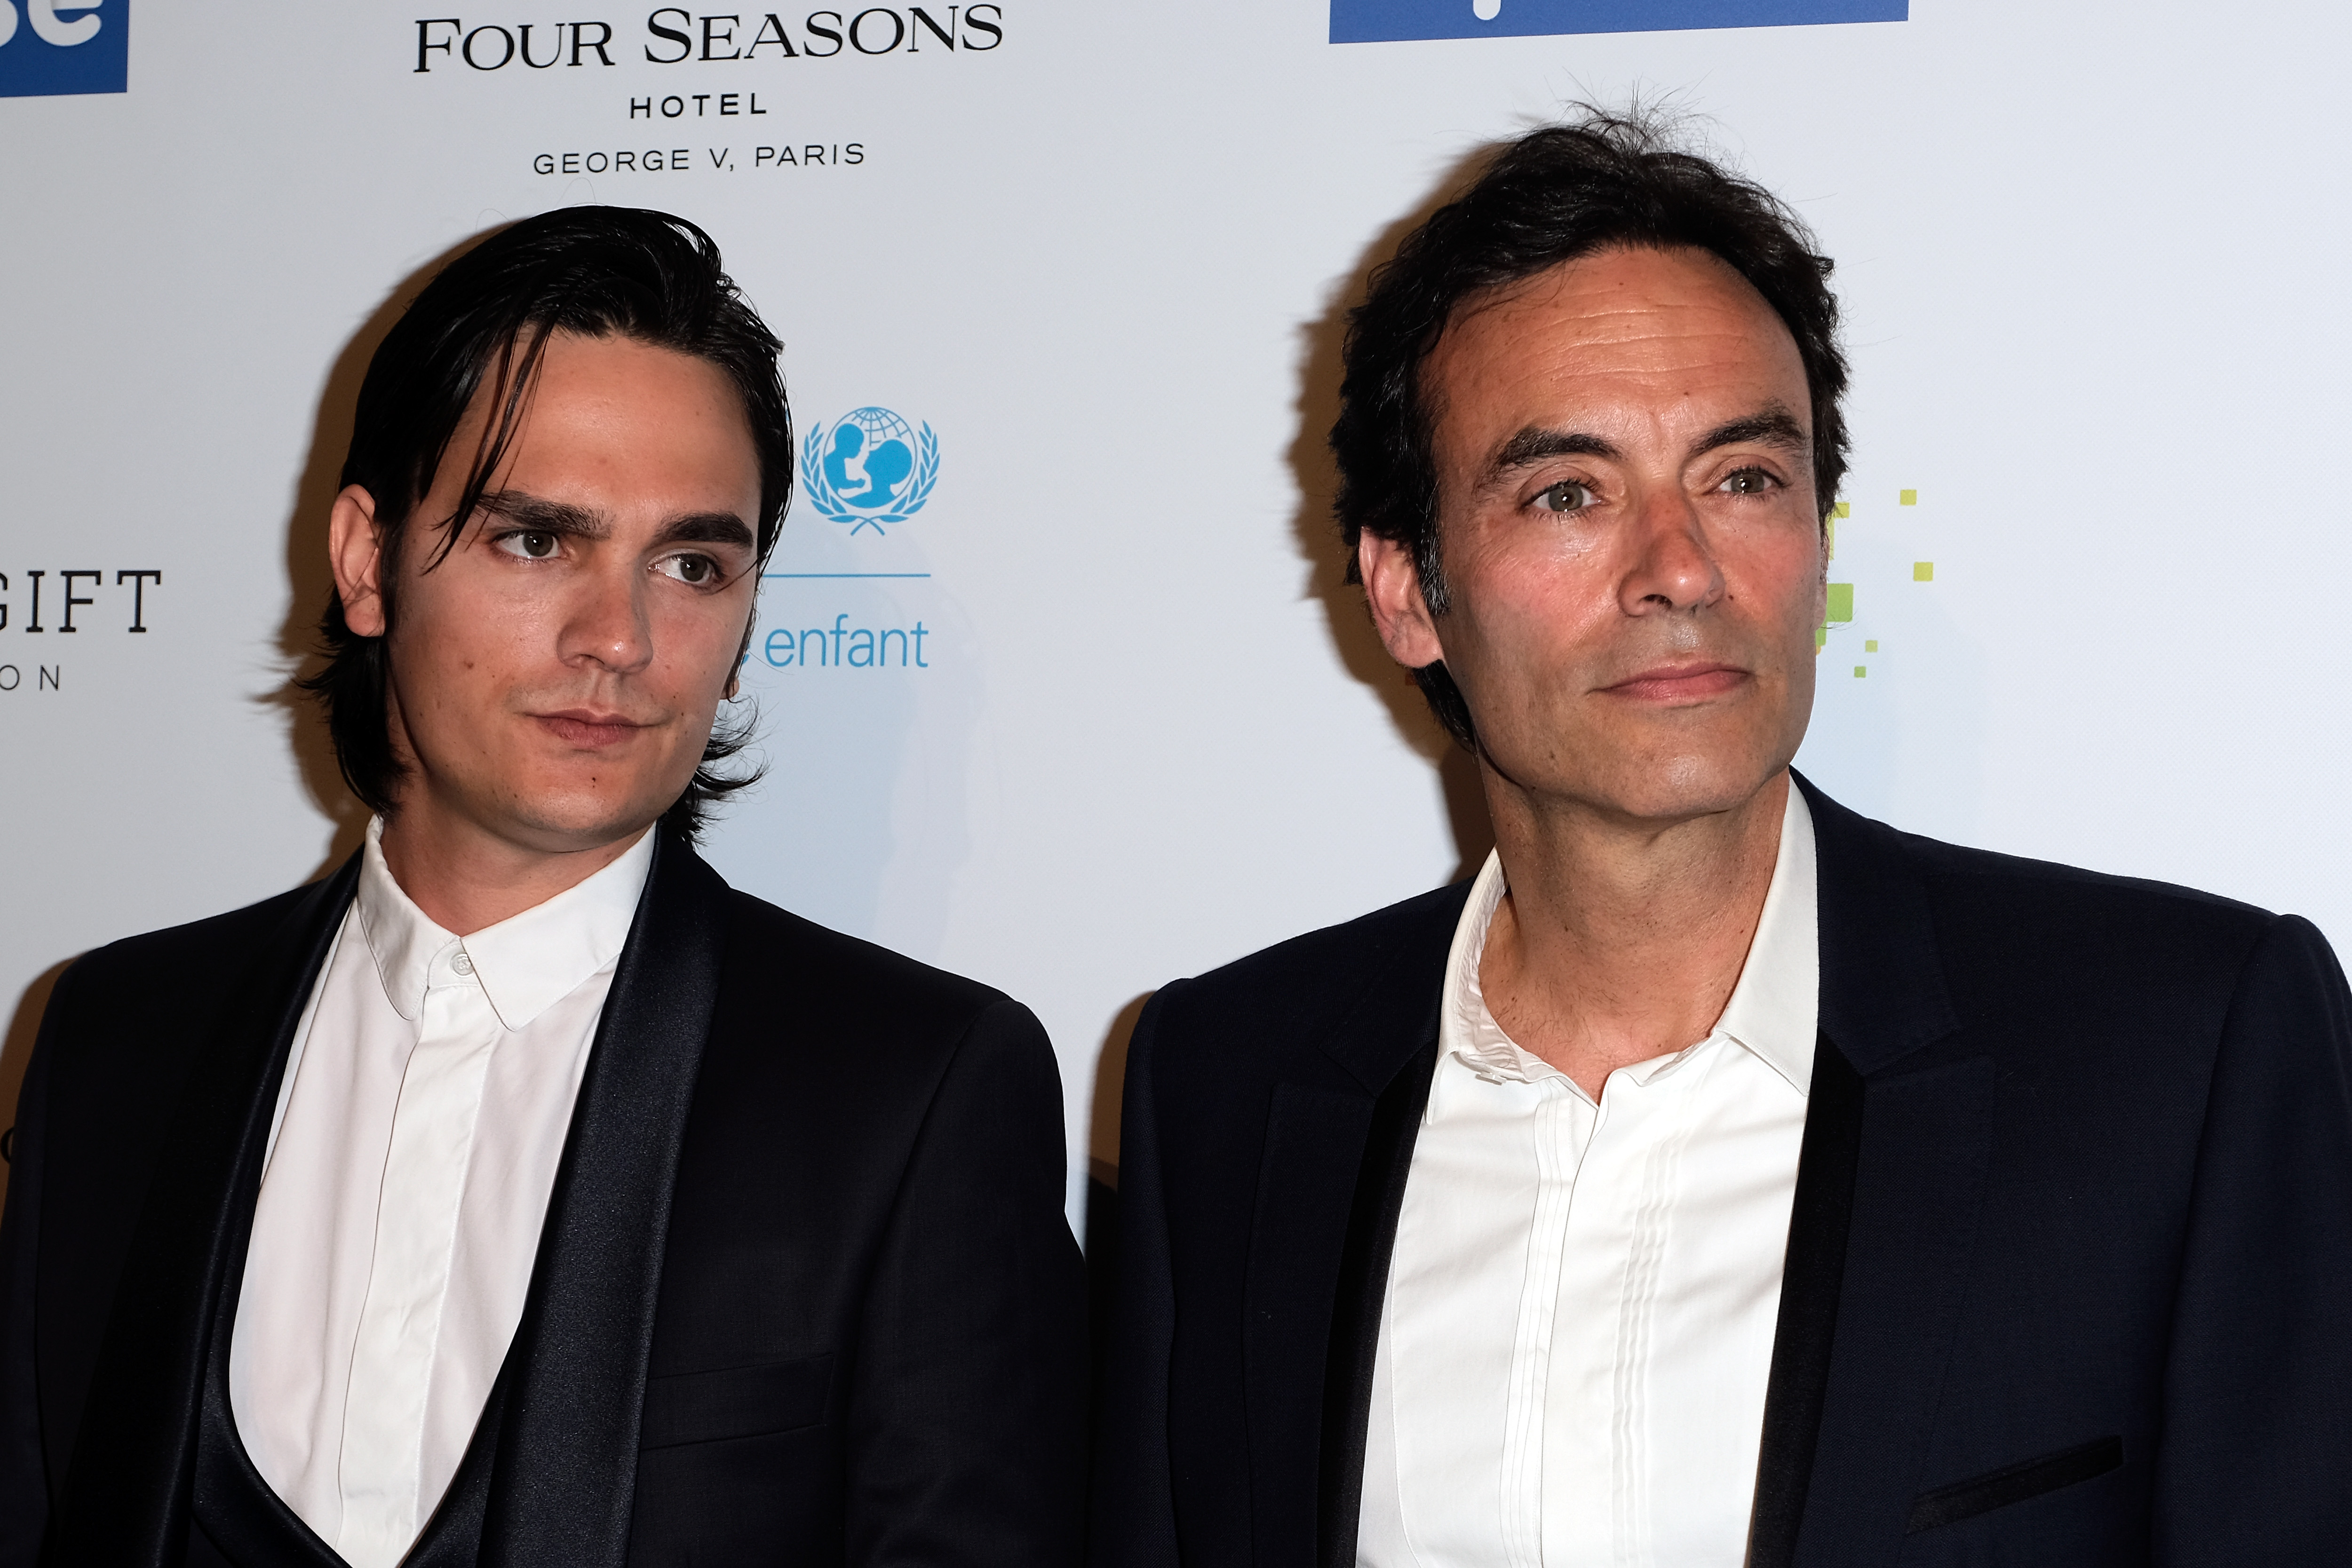 Two of the famous actor's sons at the "Global Gift Gala" in Paris, France on June 3, 2019 | Source: Getty Images